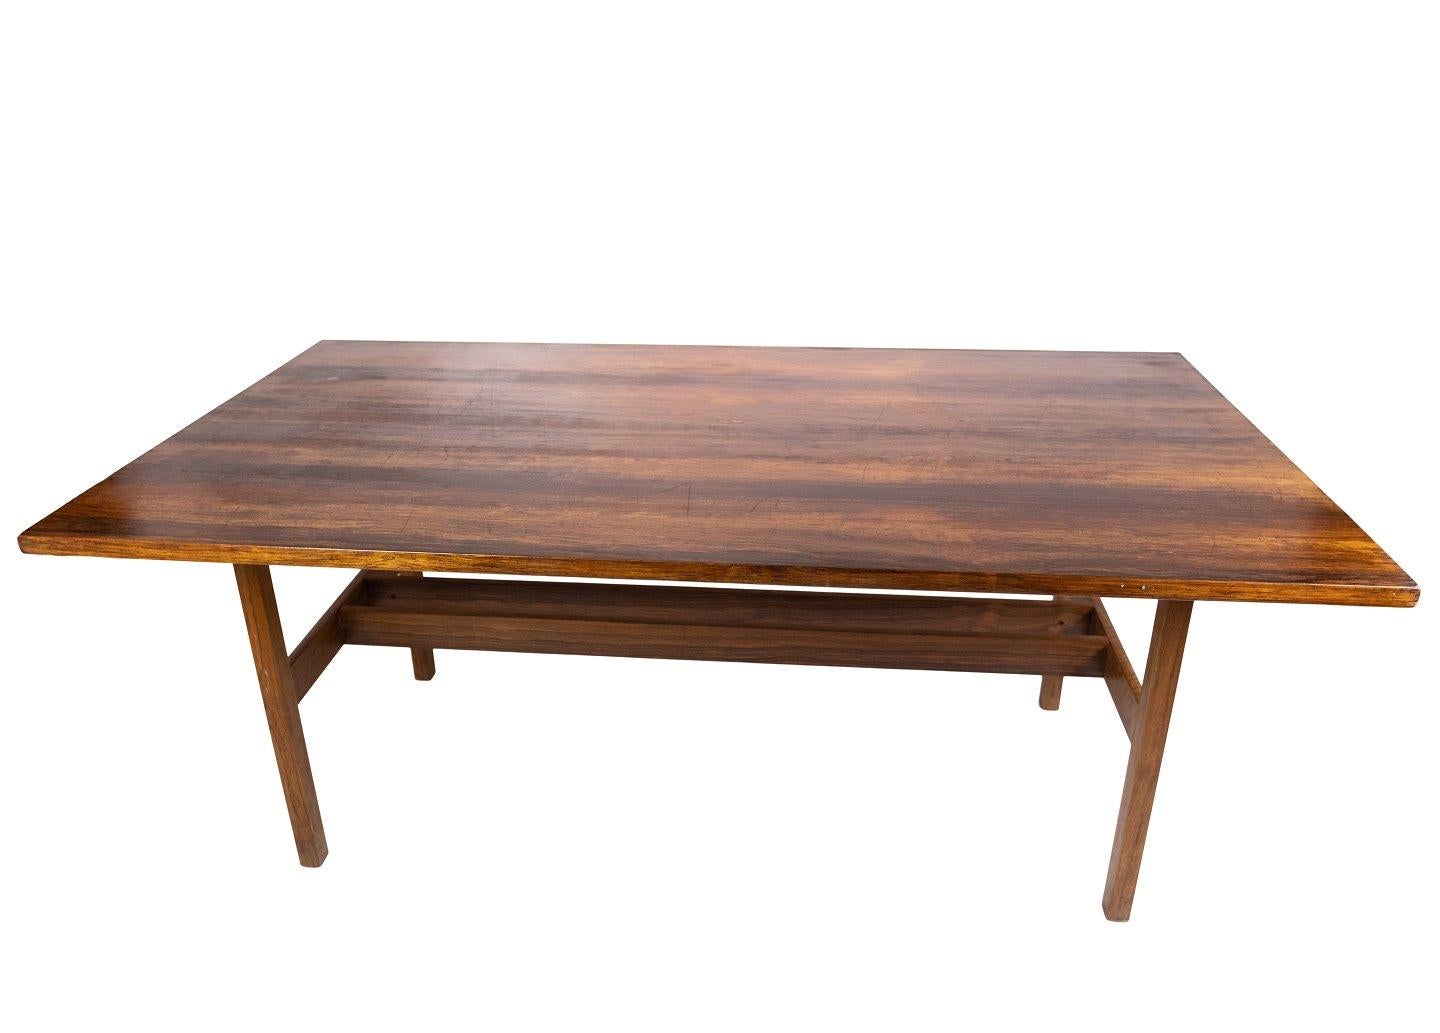 The dining table crafted in luxurious rosewood epitomizes the elegance and sophistication of Danish design during the 1960s.

Characterized by clean lines, organic shapes, and exquisite craftsmanship, Danish design from this era is celebrated for